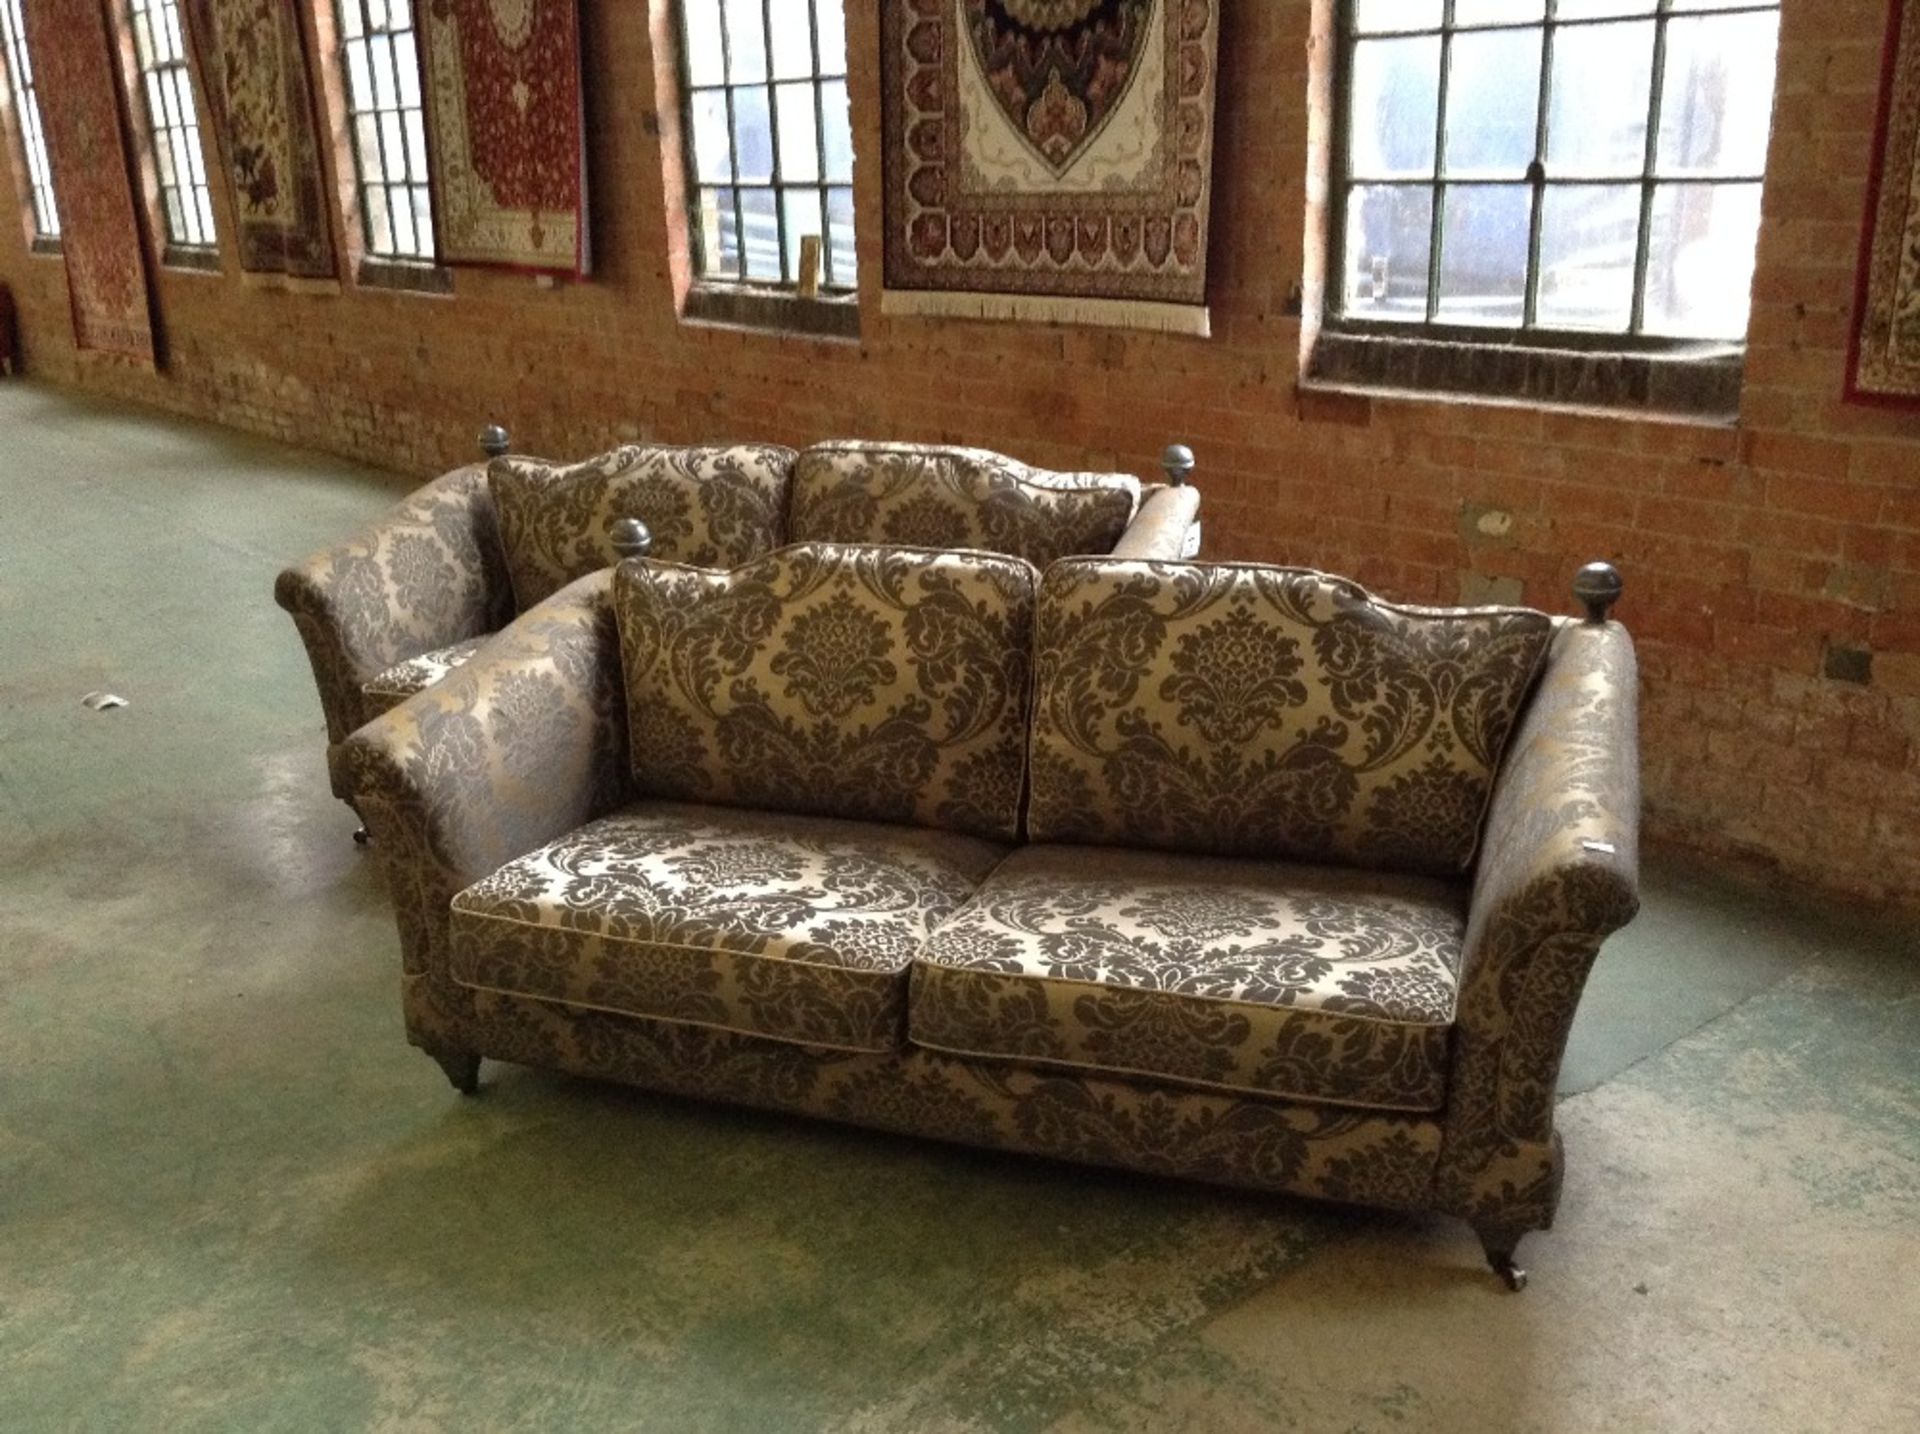 2 x GREY AND GOLD FLORAL PATTERNED 3 SEATER SOFAS (damaged)